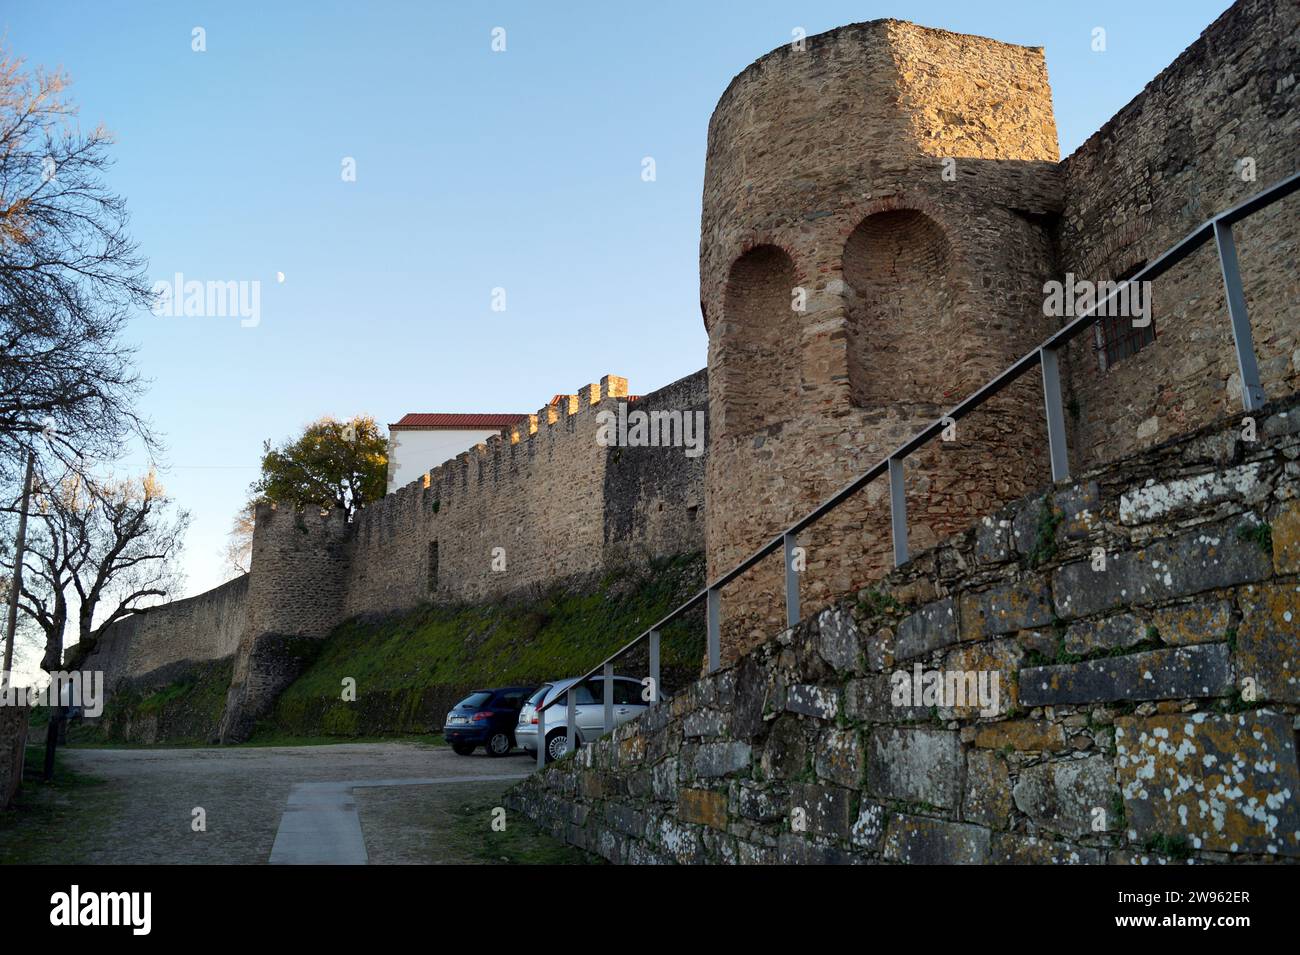 Bastions and ramparts of the Castle of Abrantes, western side with the gate tower and ramp, view in sunset light, Portugal Stock Photo